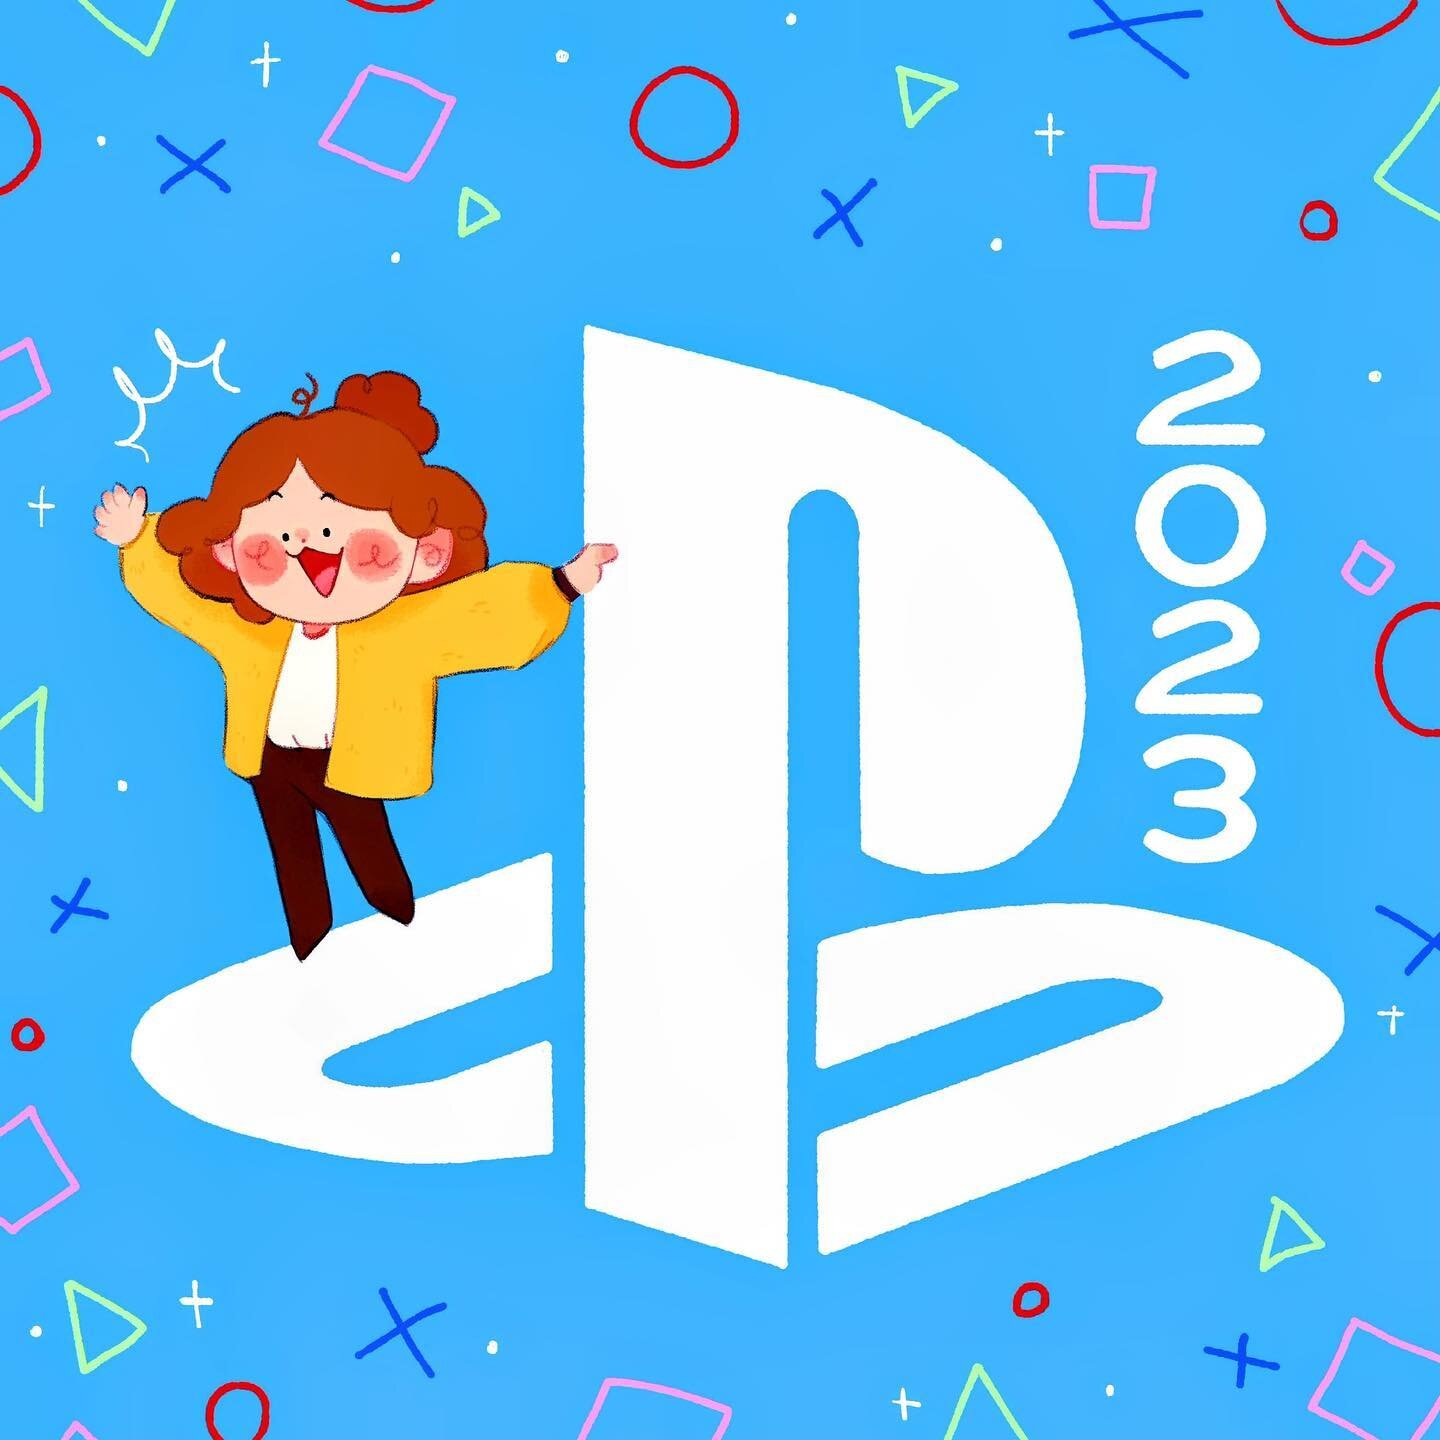 I am now well into my 3rd week as an intern at @playstation !! I am flabbergasted that I&rsquo;m actually here and I hope to show some of the fun parts of this adventure! 💖🎉
#playstation #playstationintern #intern #gamedev #art #yippee #technicalar